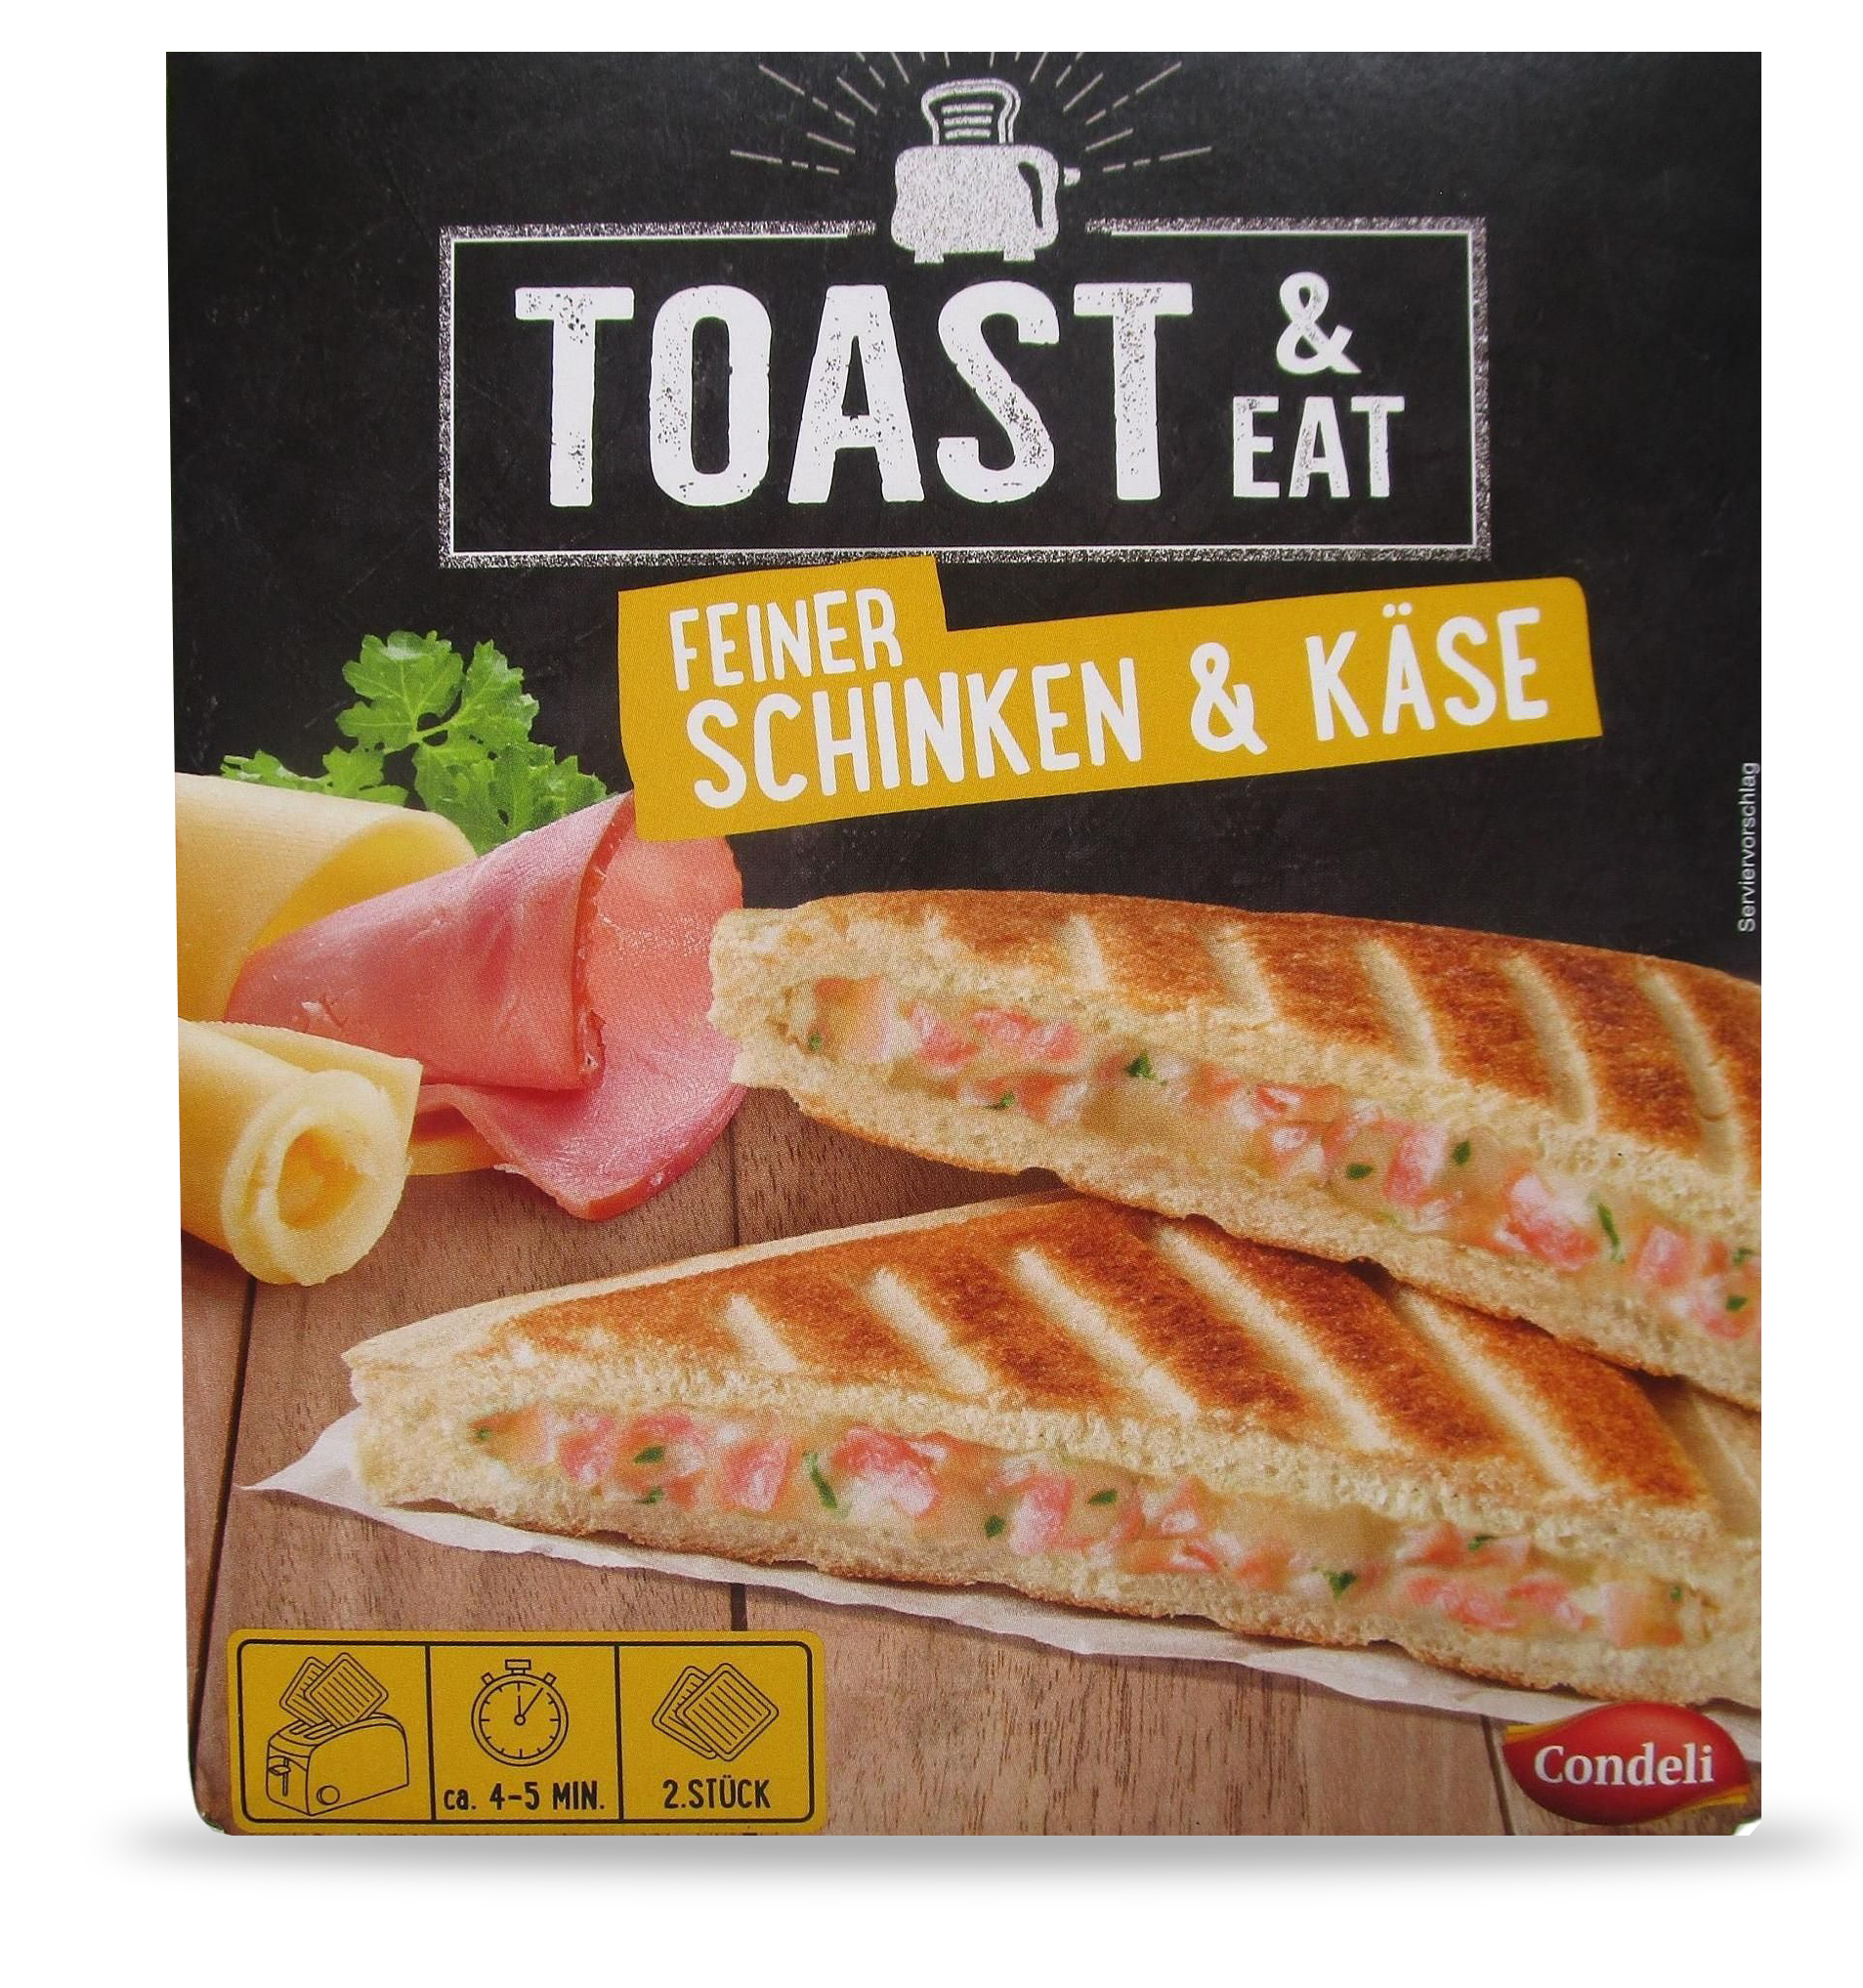 Toast and eat branded food